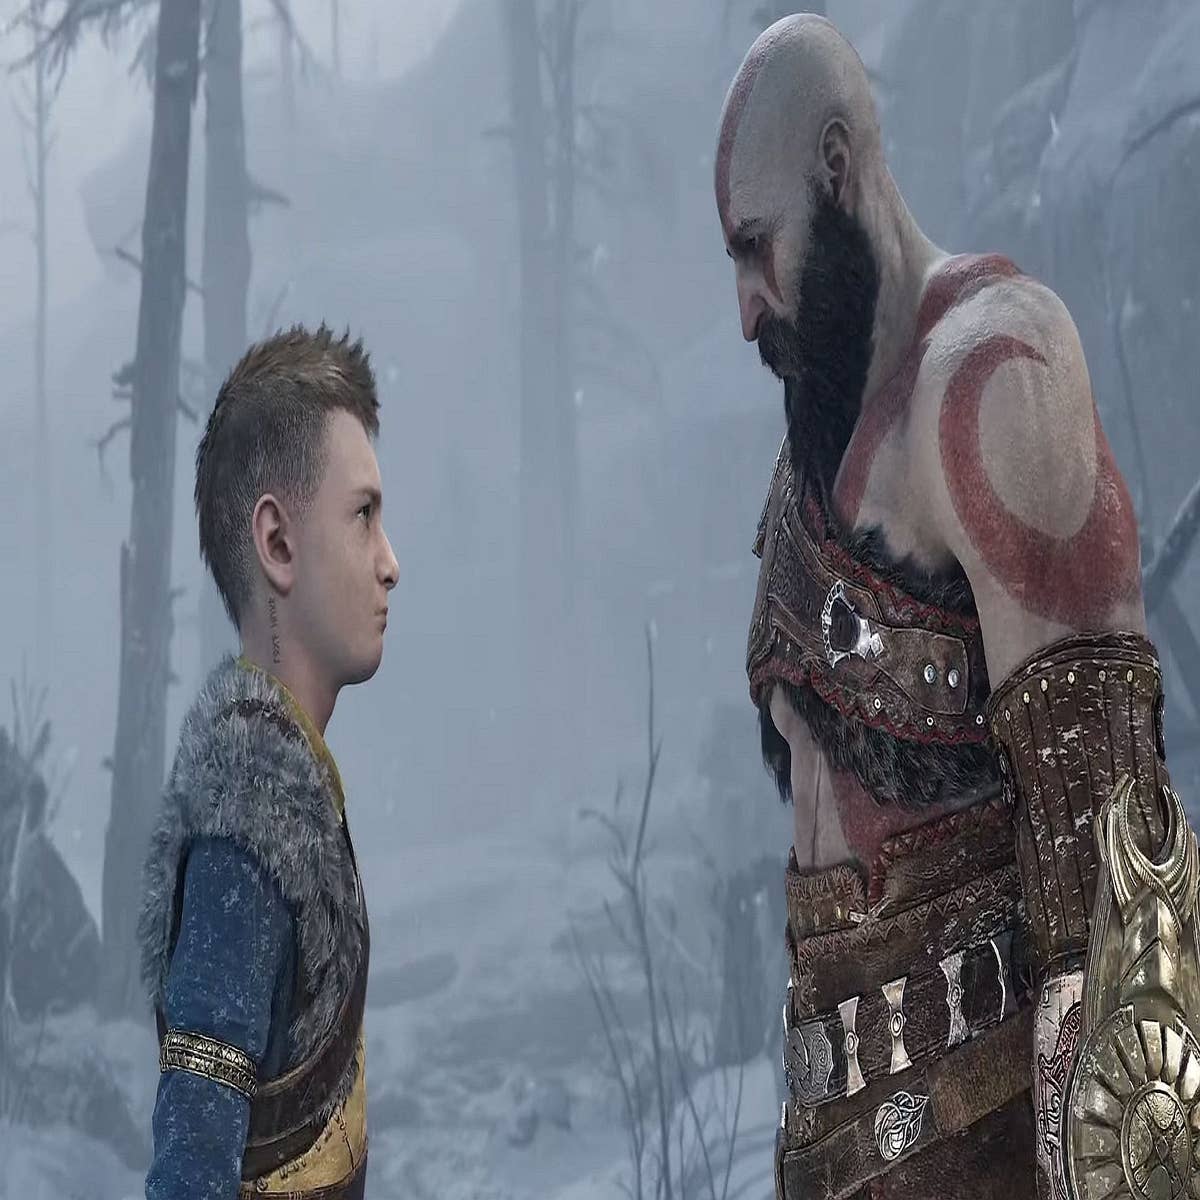 Here's a Full Look at Thor in God of War: Ragnarok